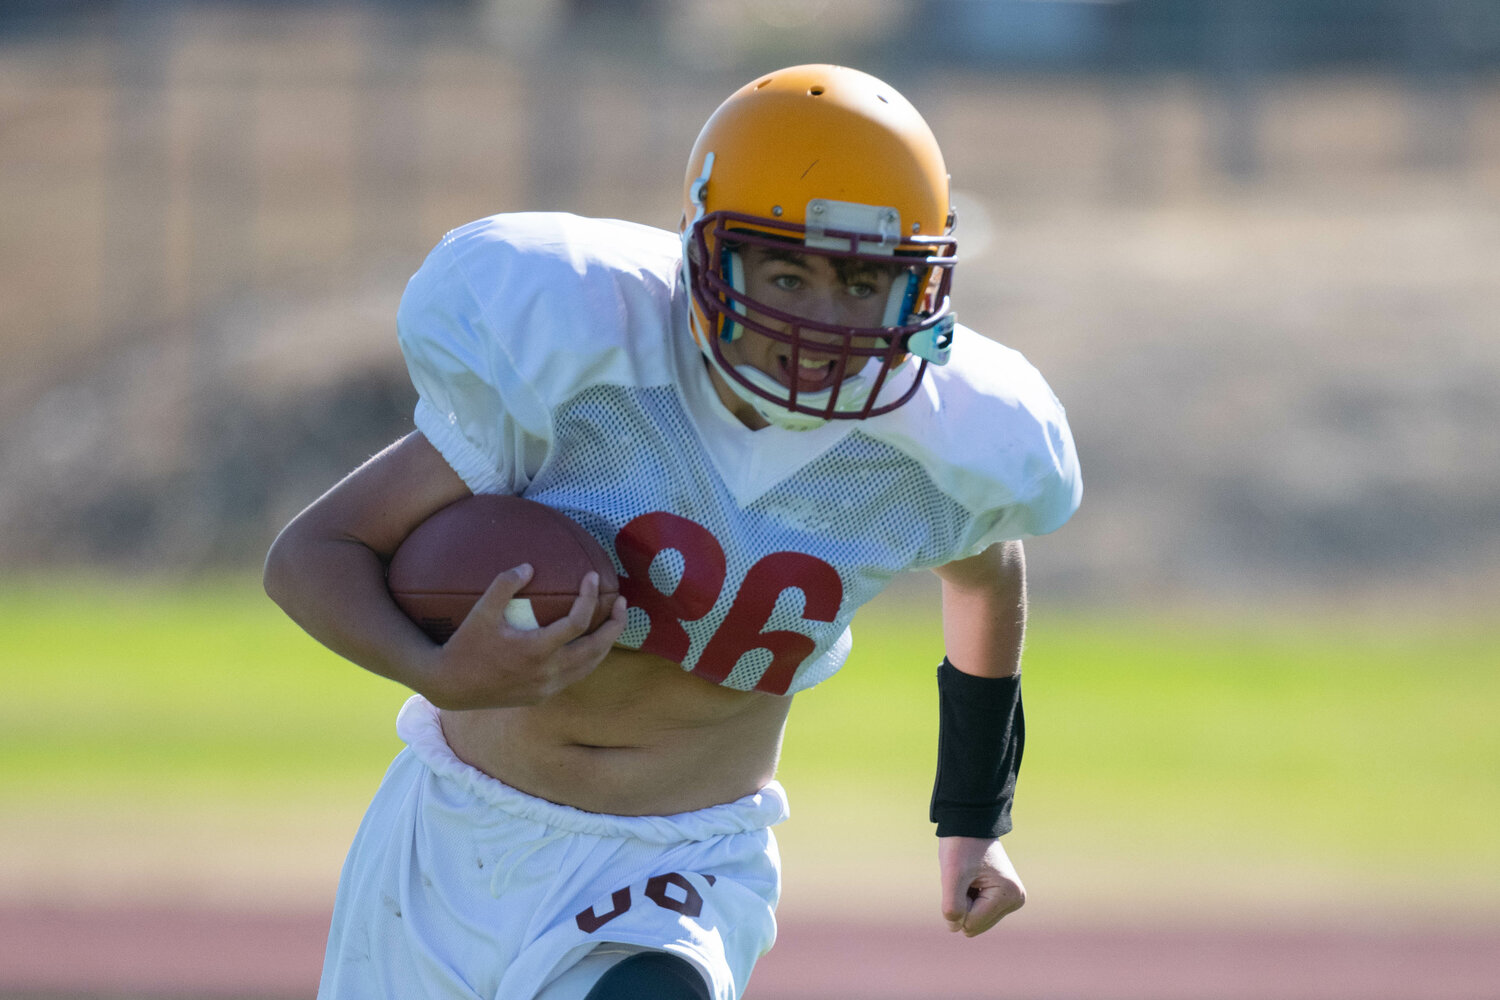 Julian Auve carries the ball at Winlock's practice on Aug. 19.